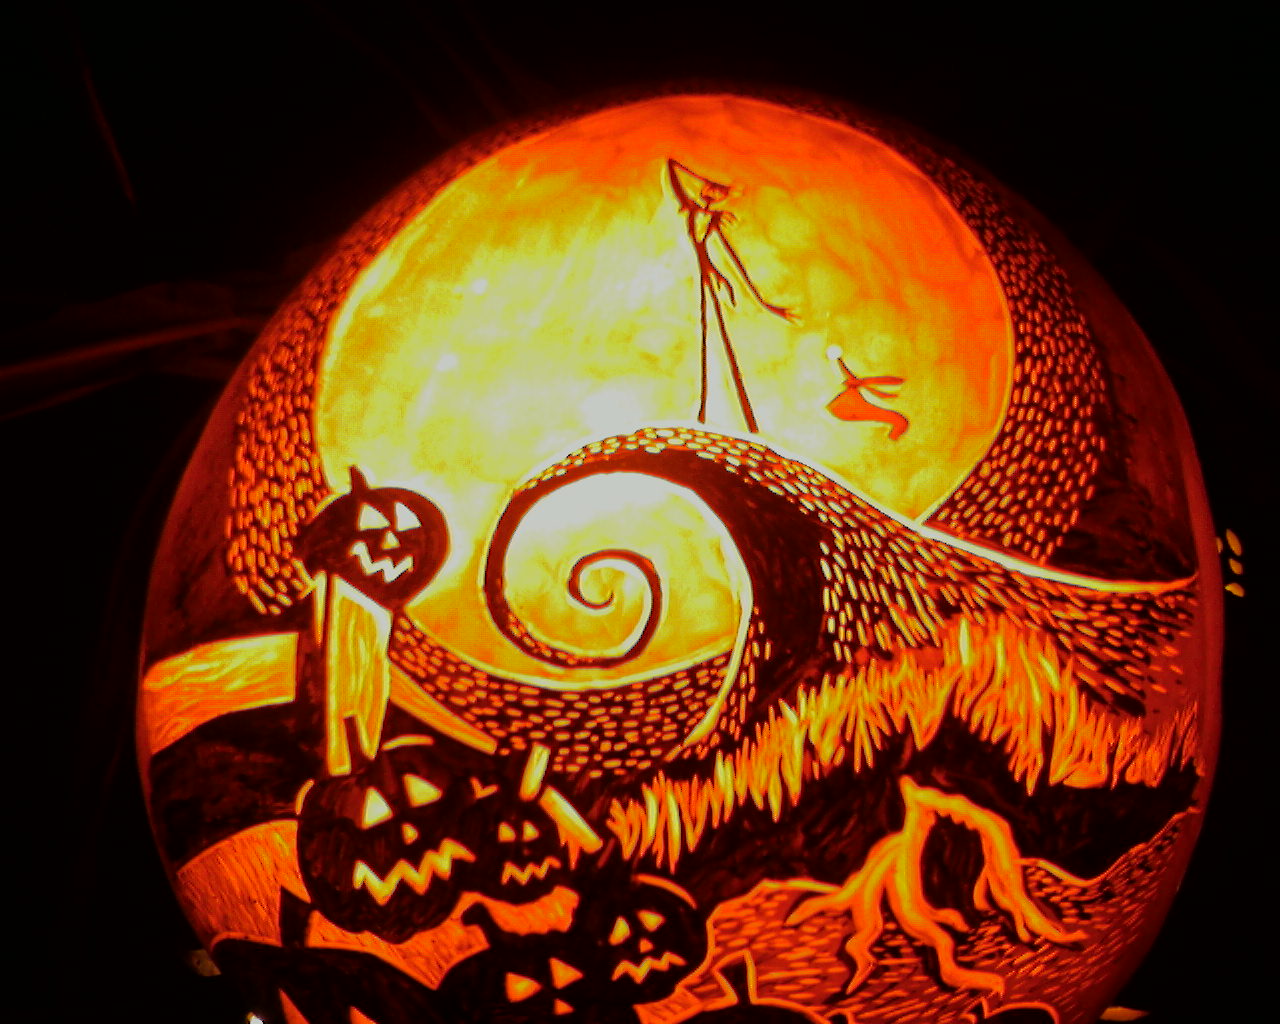 Nightmare Before Christmas Pumpkin Carving Images & Pictures - Becuo